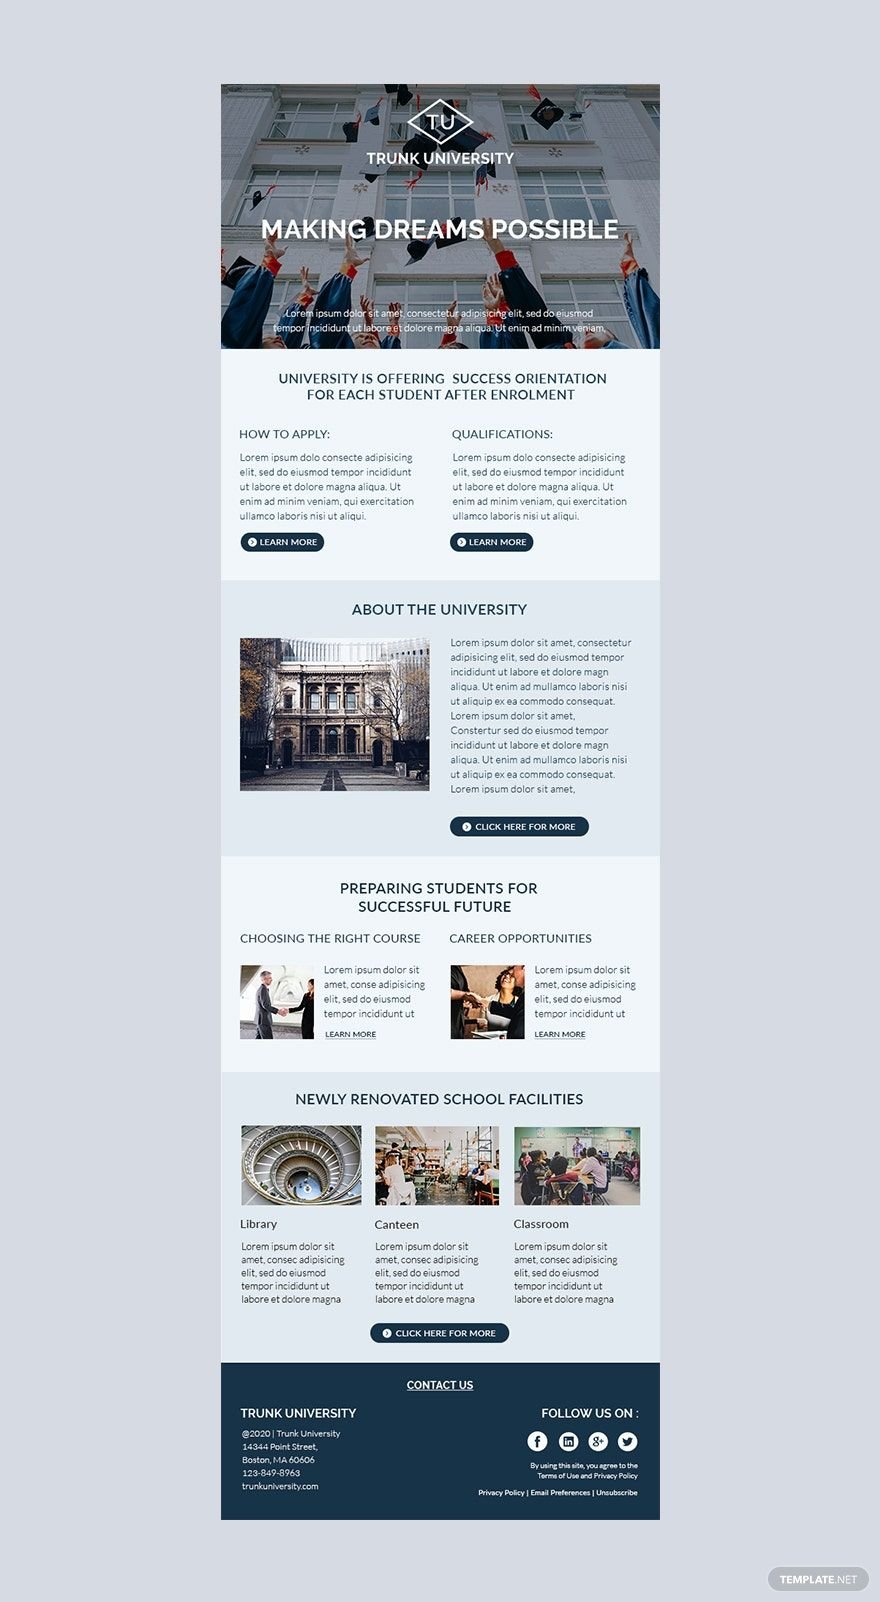 University Email Newsletter Template in Word, PSD, Apple Pages, Publisher, Outlook, HTML5